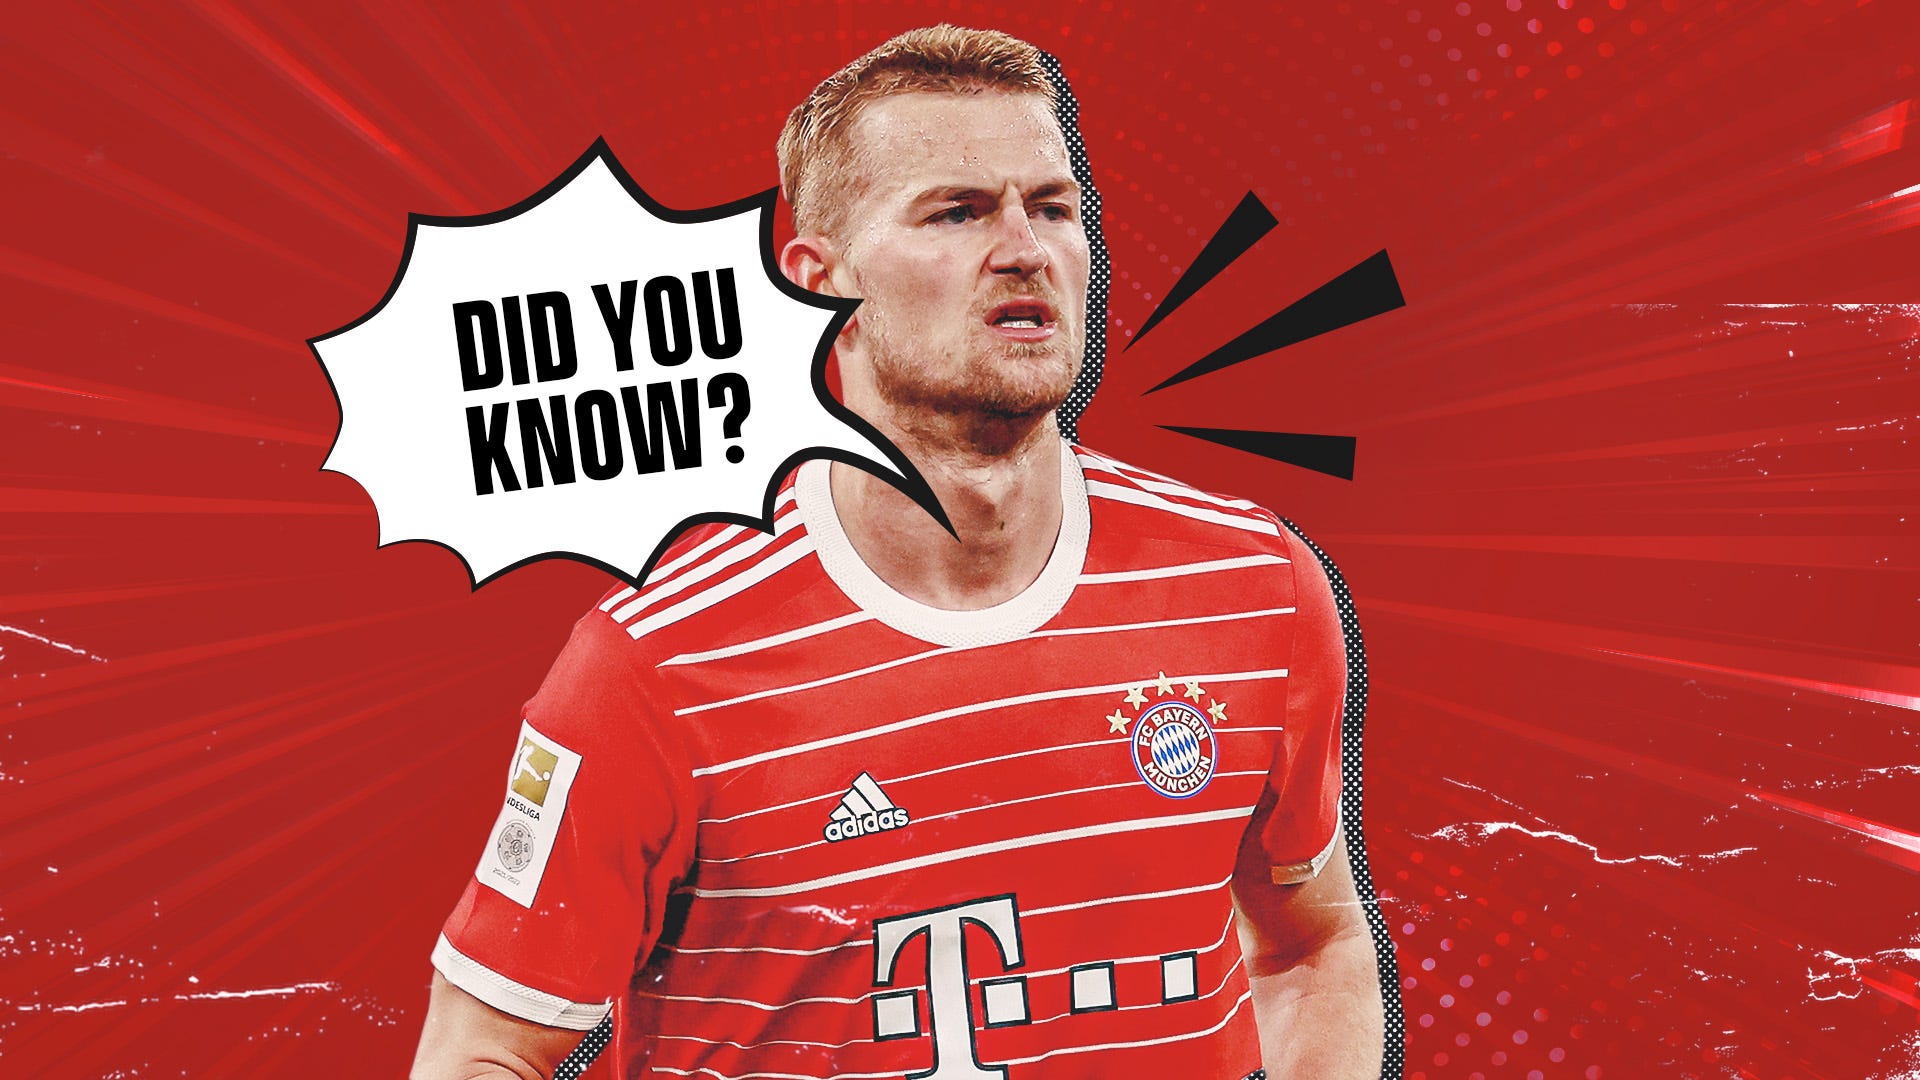 13-fun-facts-about-matthijs-de-ligt-or-goal-com-india